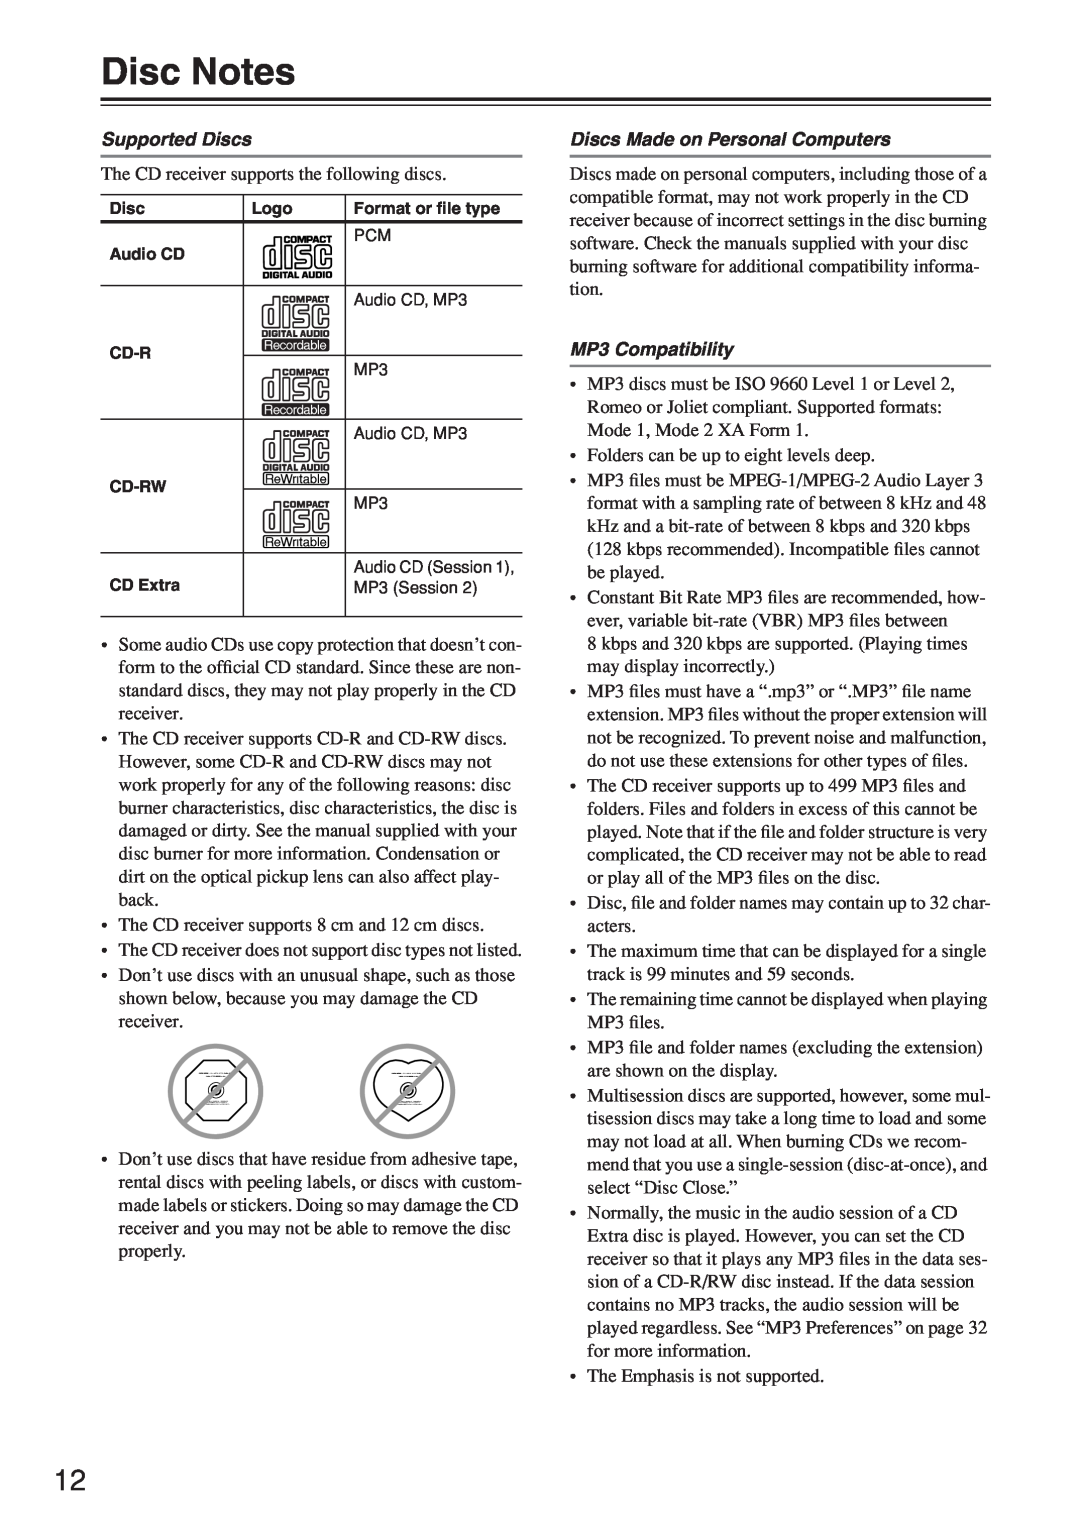 Onkyo CR-N7 instruction manual Disc Notes, Supported Discs, Discs Made on Personal Computers, MP3 Compatibility 